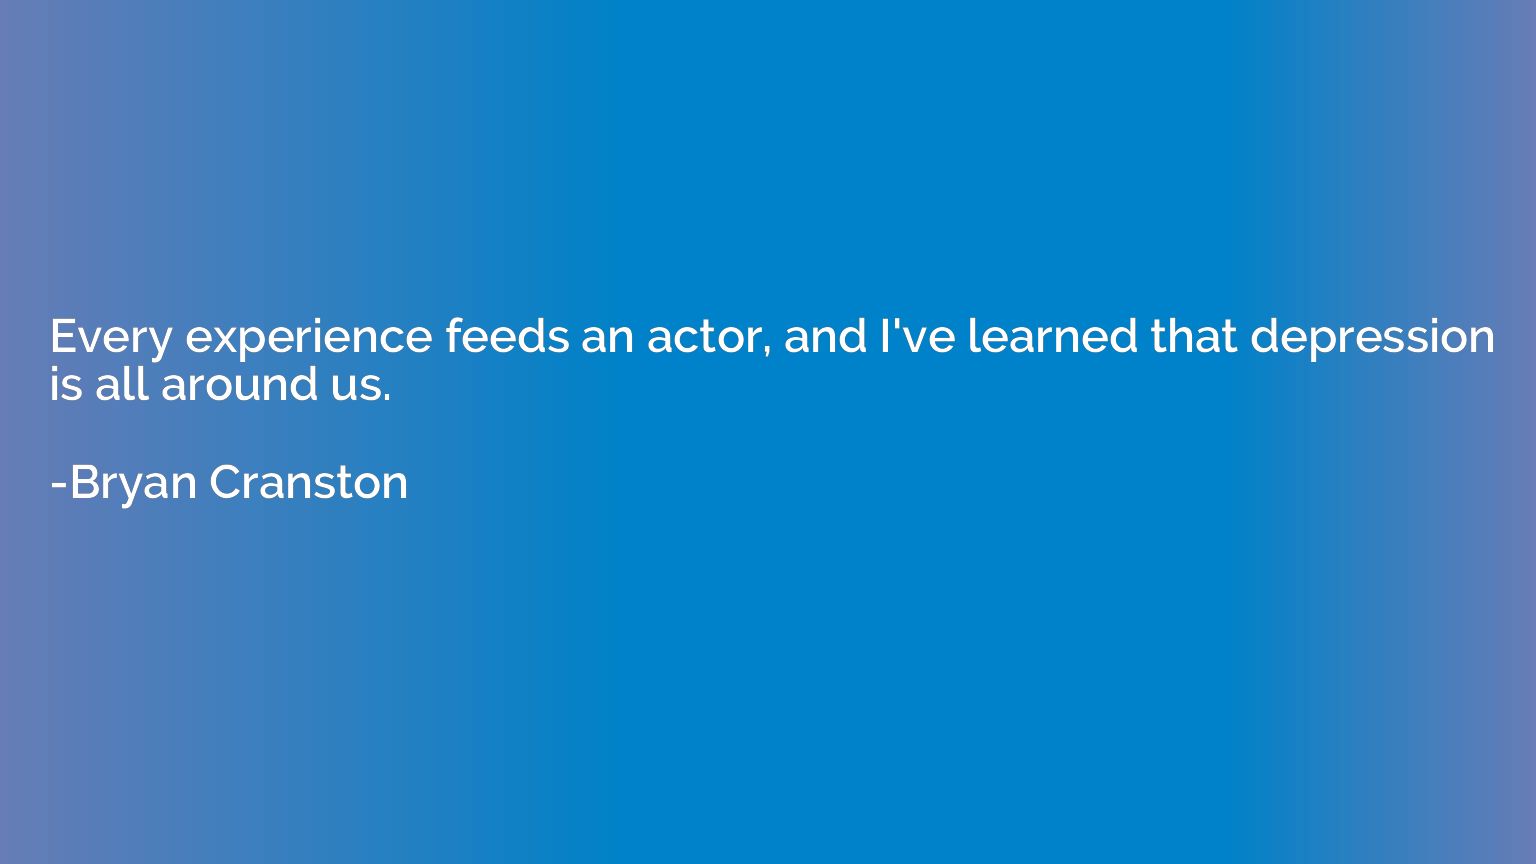 Every experience feeds an actor, and I've learned that depre